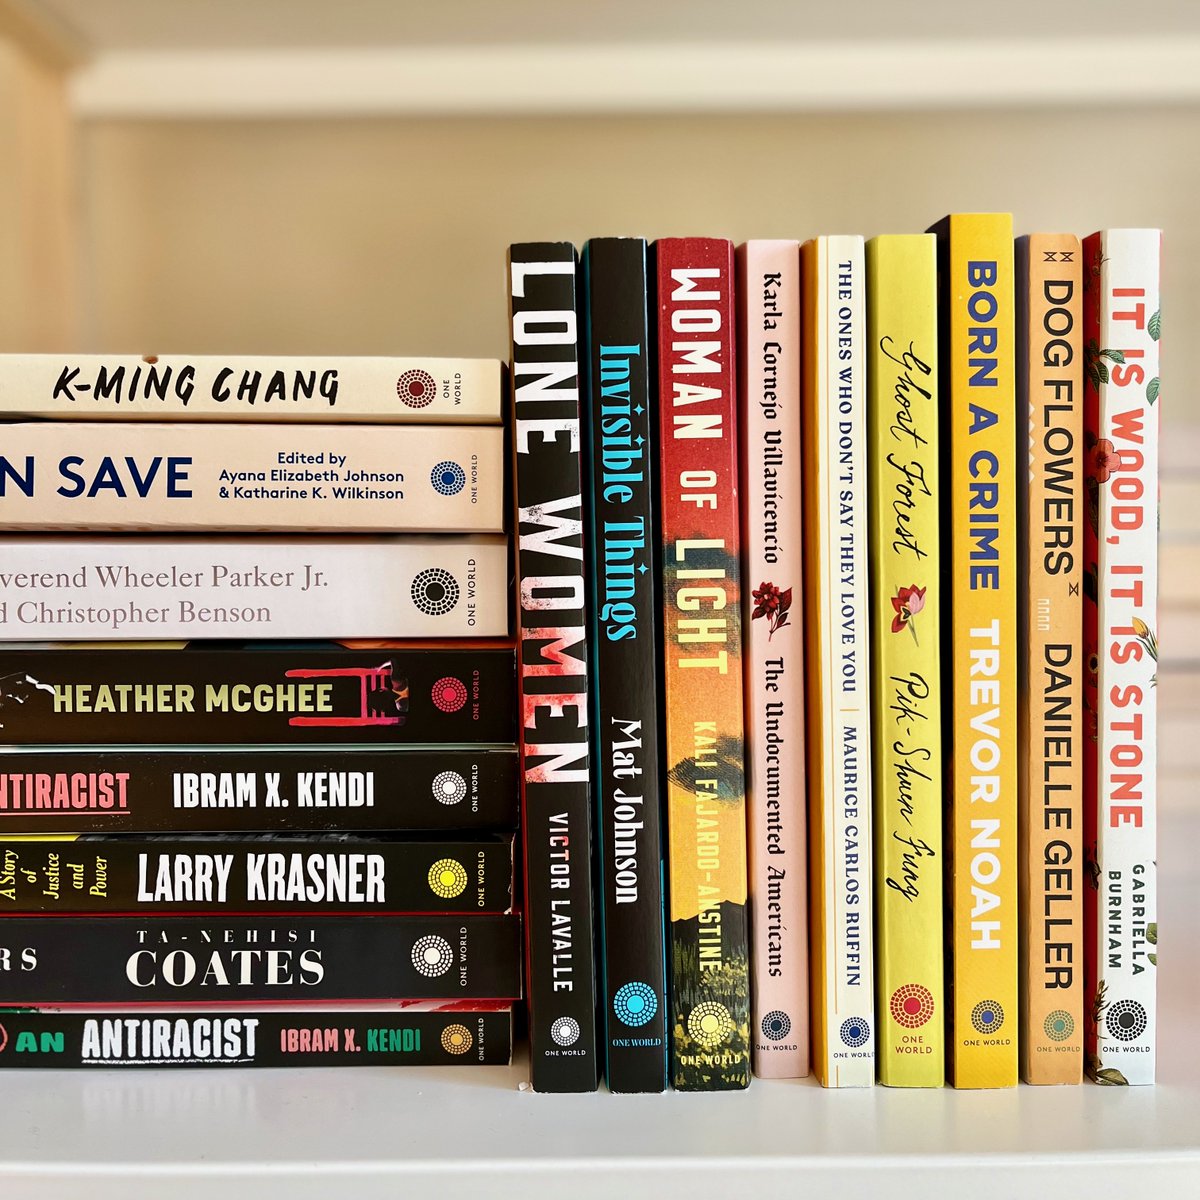 The Financial Times called One World an imprint 'known for titles that bear witness to the complexities of a diverse world.' From our entire team, wishing you an illuminating #WorldBookDay! Is there a book in this stack that made an impact on you? Tell us below! 📚